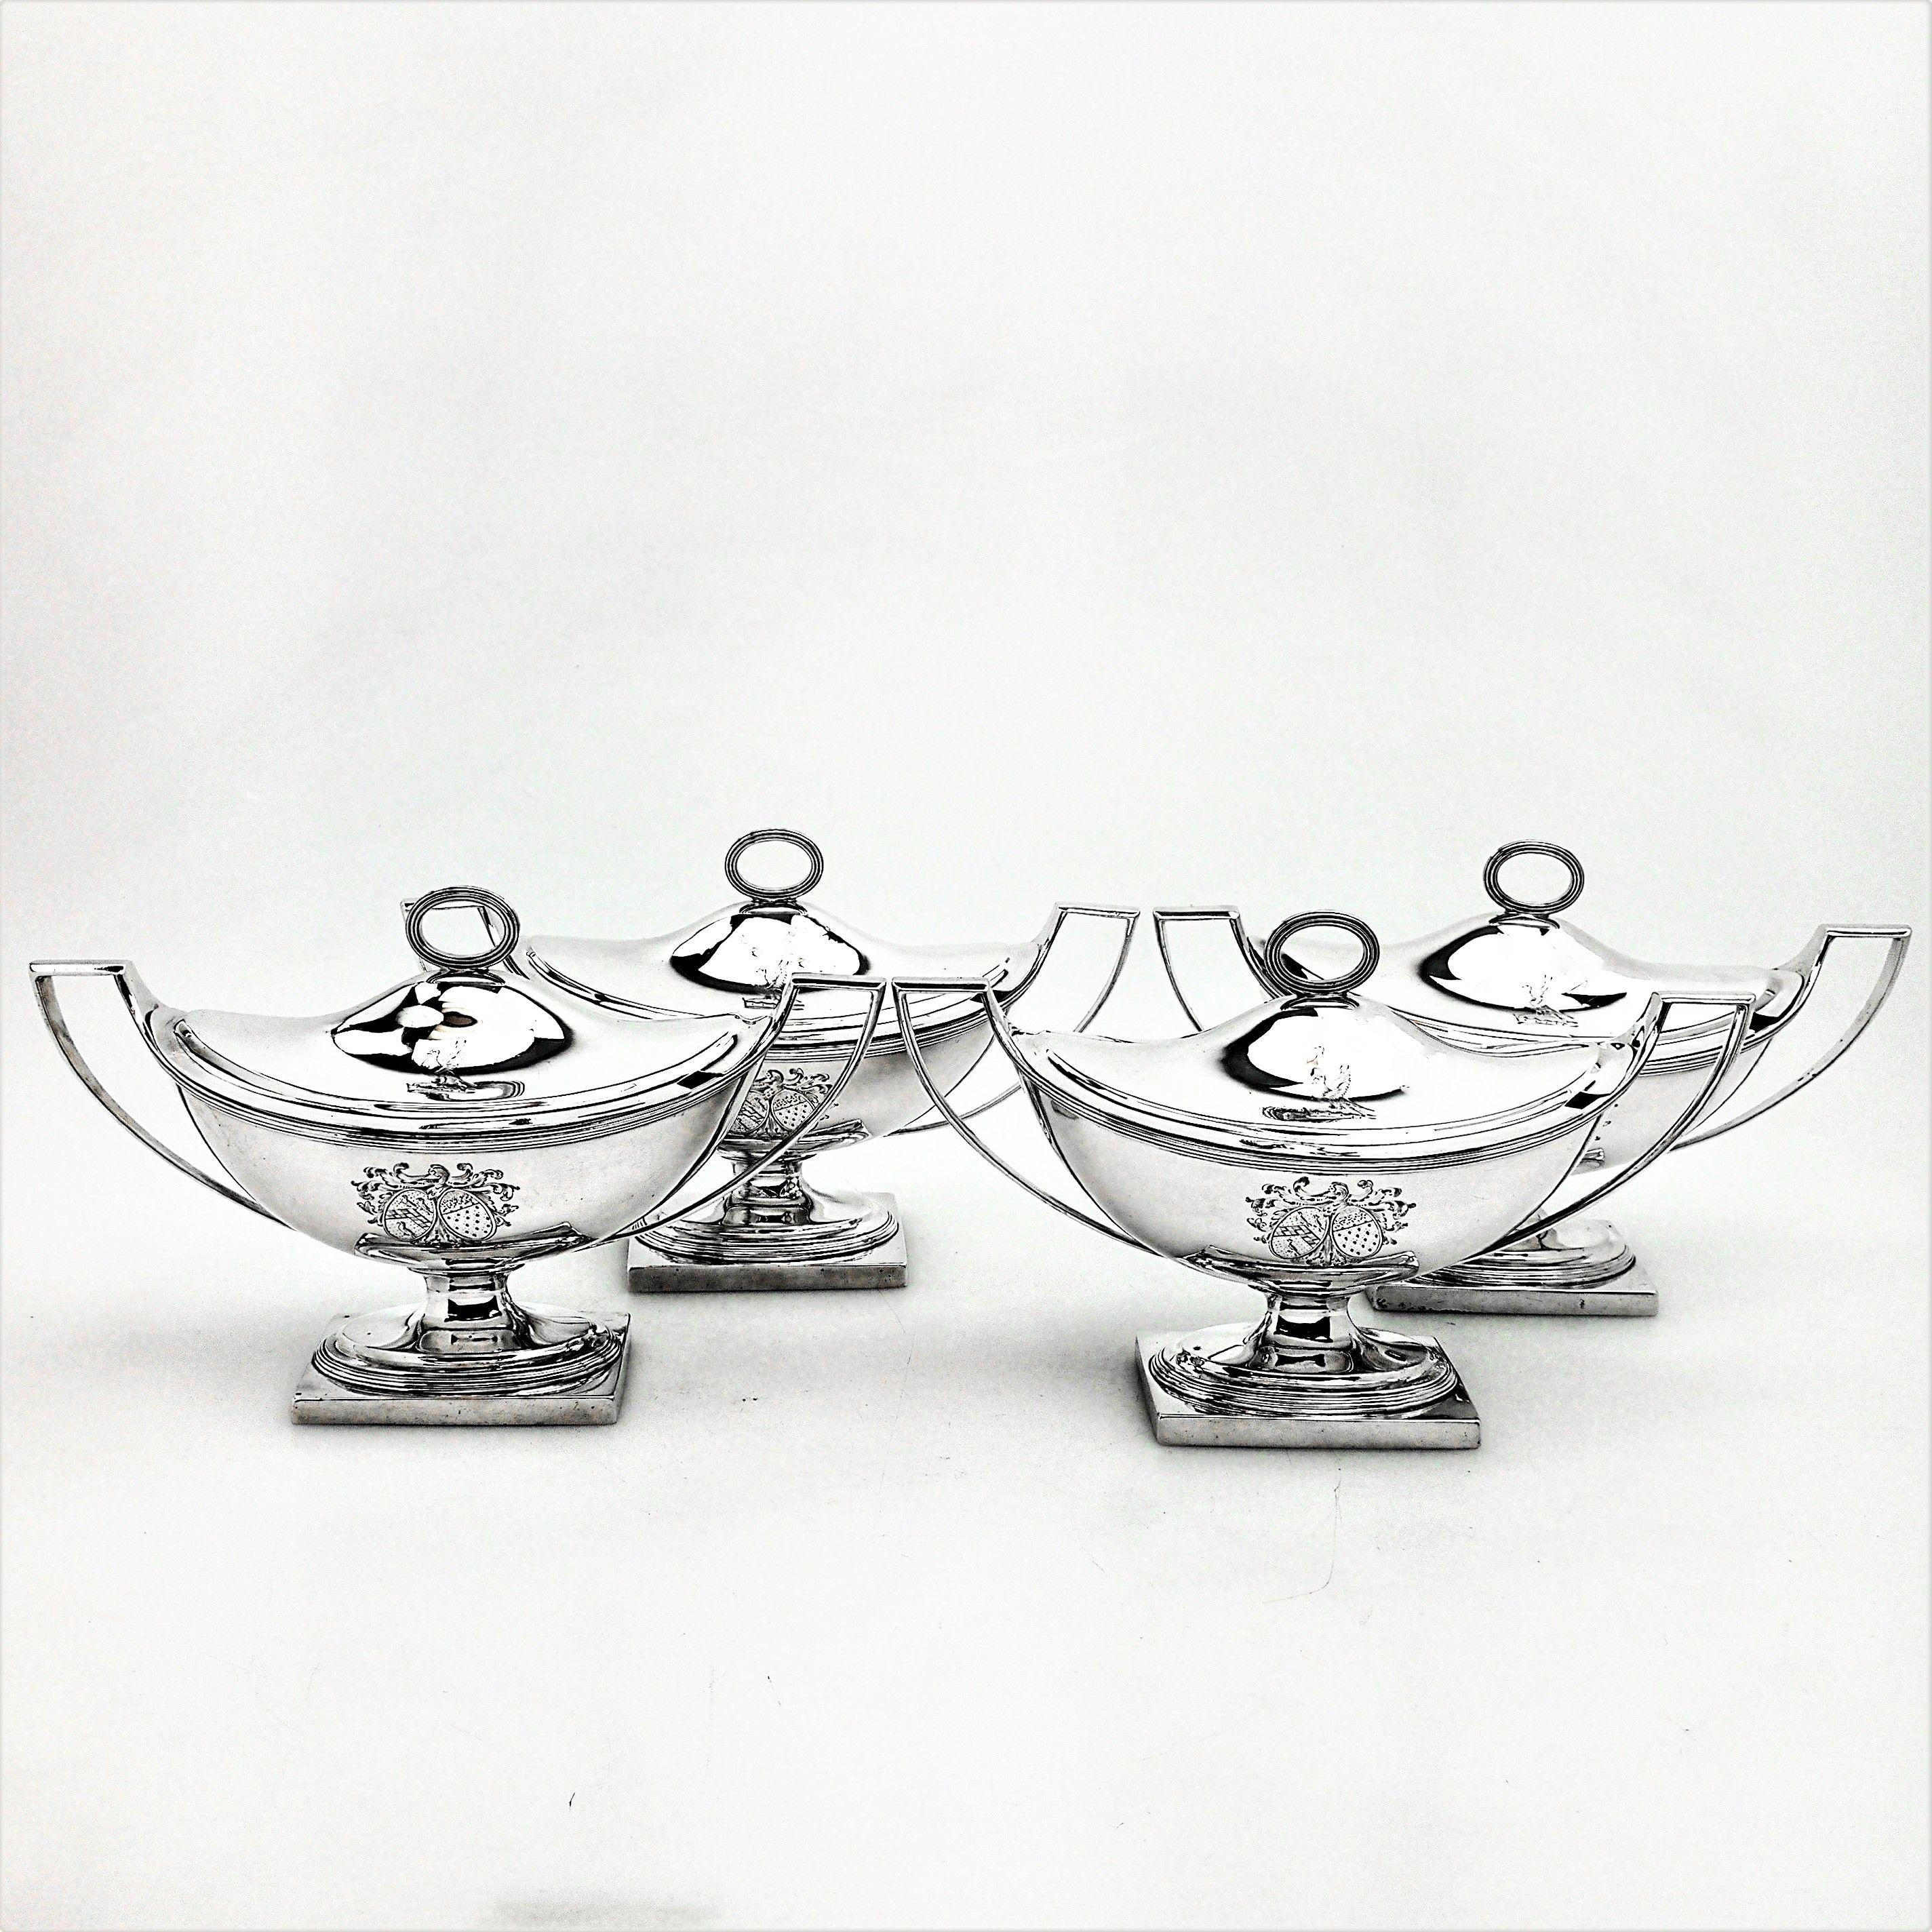 A set of four antique George III Solid Silver Sauce Tureens in a Classic oval form and standing on a square base. Each Tureen has a pair of impressive handles and the fitted domed lids have a reeded oval finial. Each tureen has a large engraved